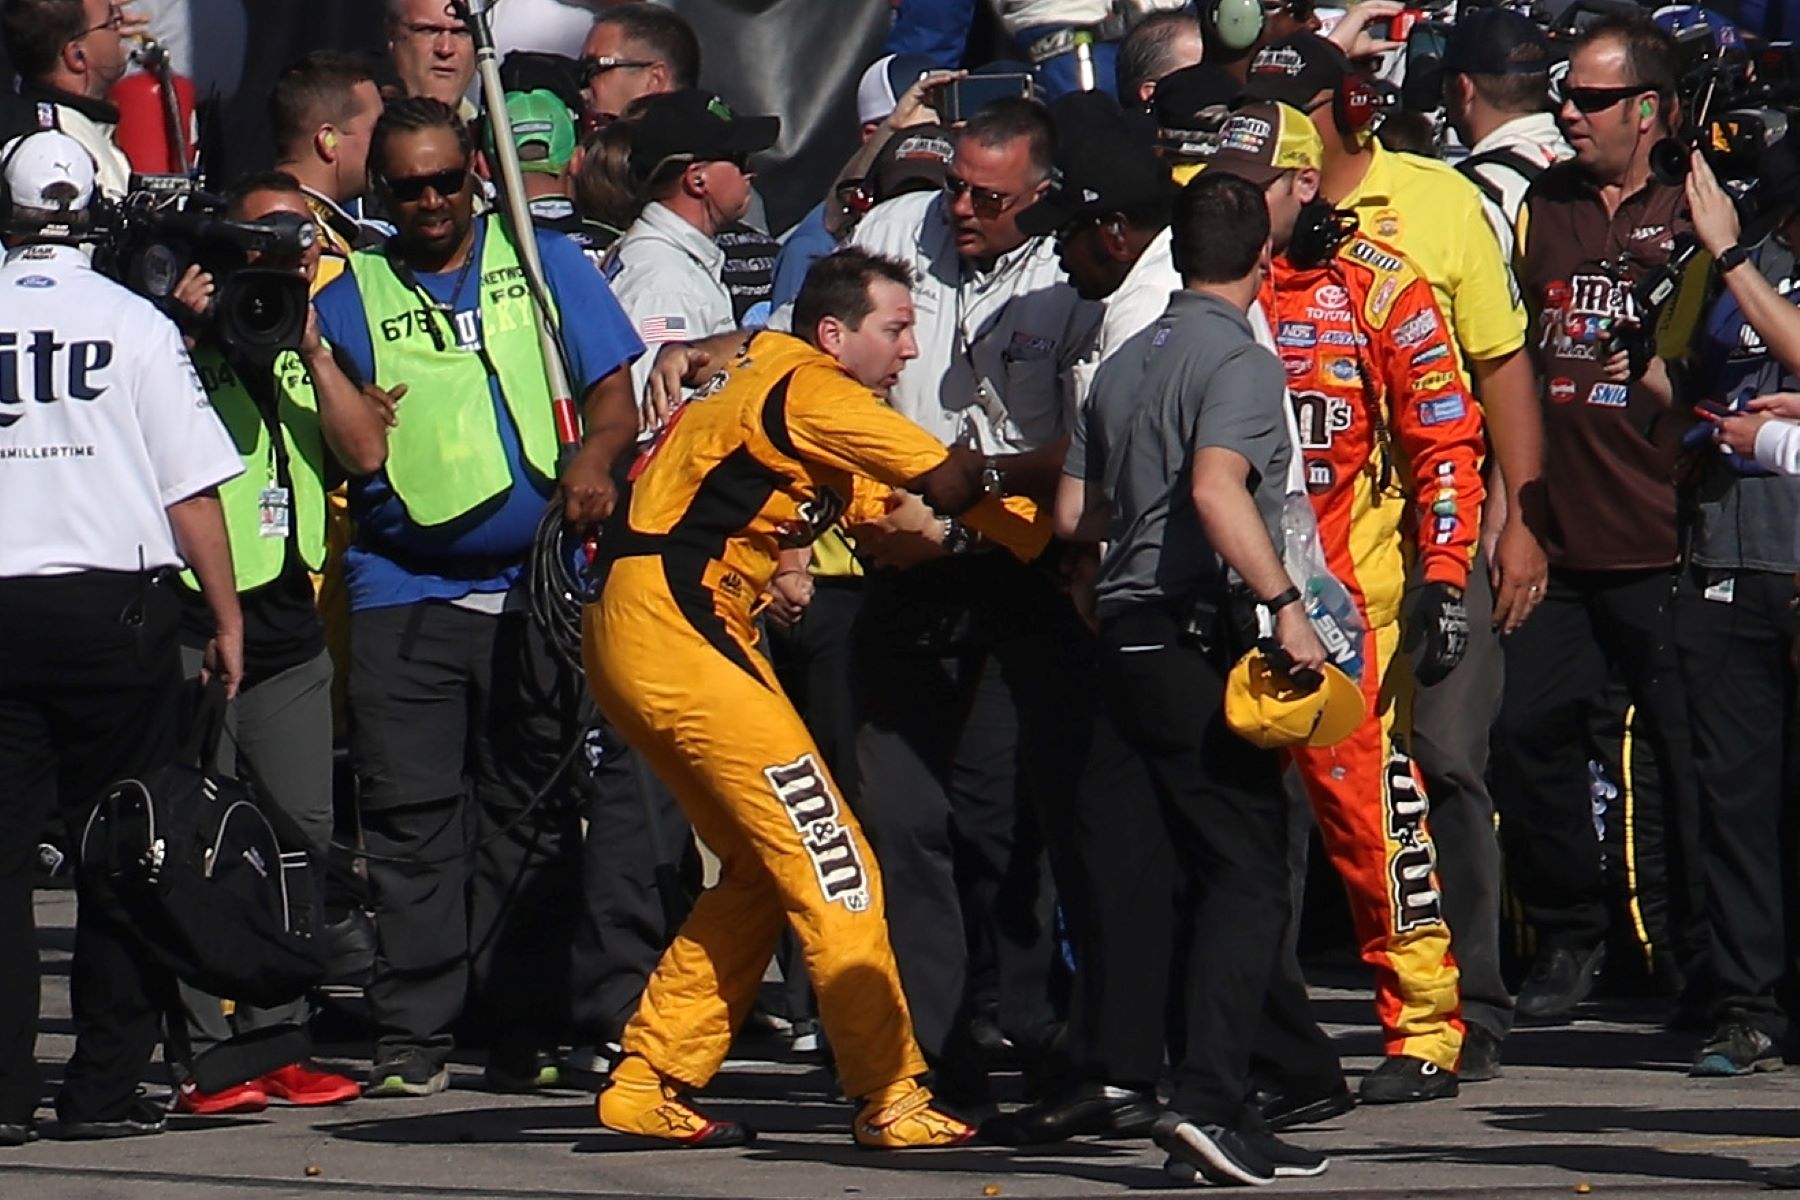 Kyle Busch being escorted away by NASCAR officials after fighting with Joey Logano's pit crew